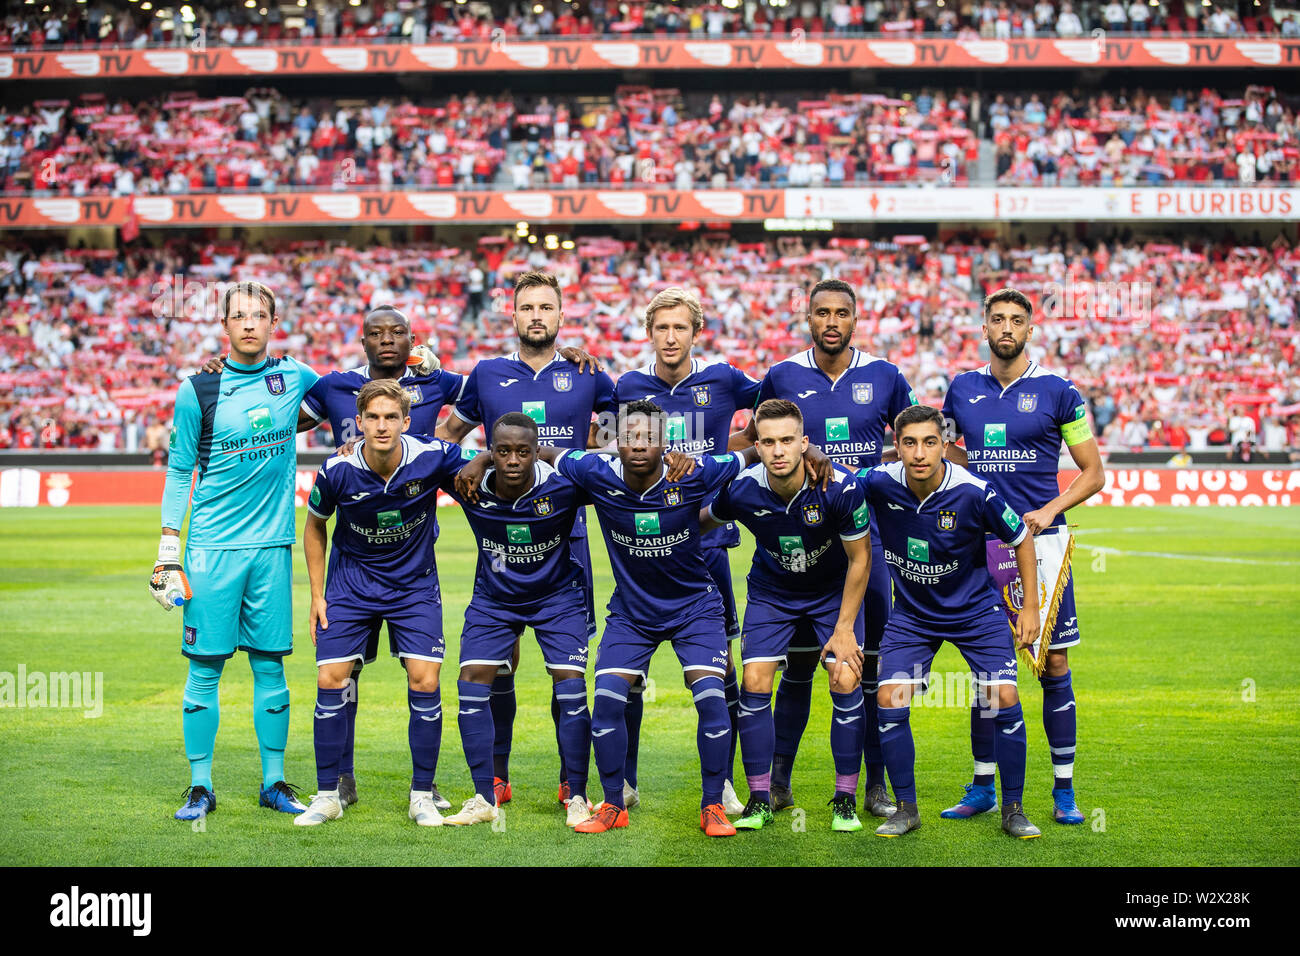 1,530 Anderlecht V Ohl Jupiler League Photos & High Res Pictures